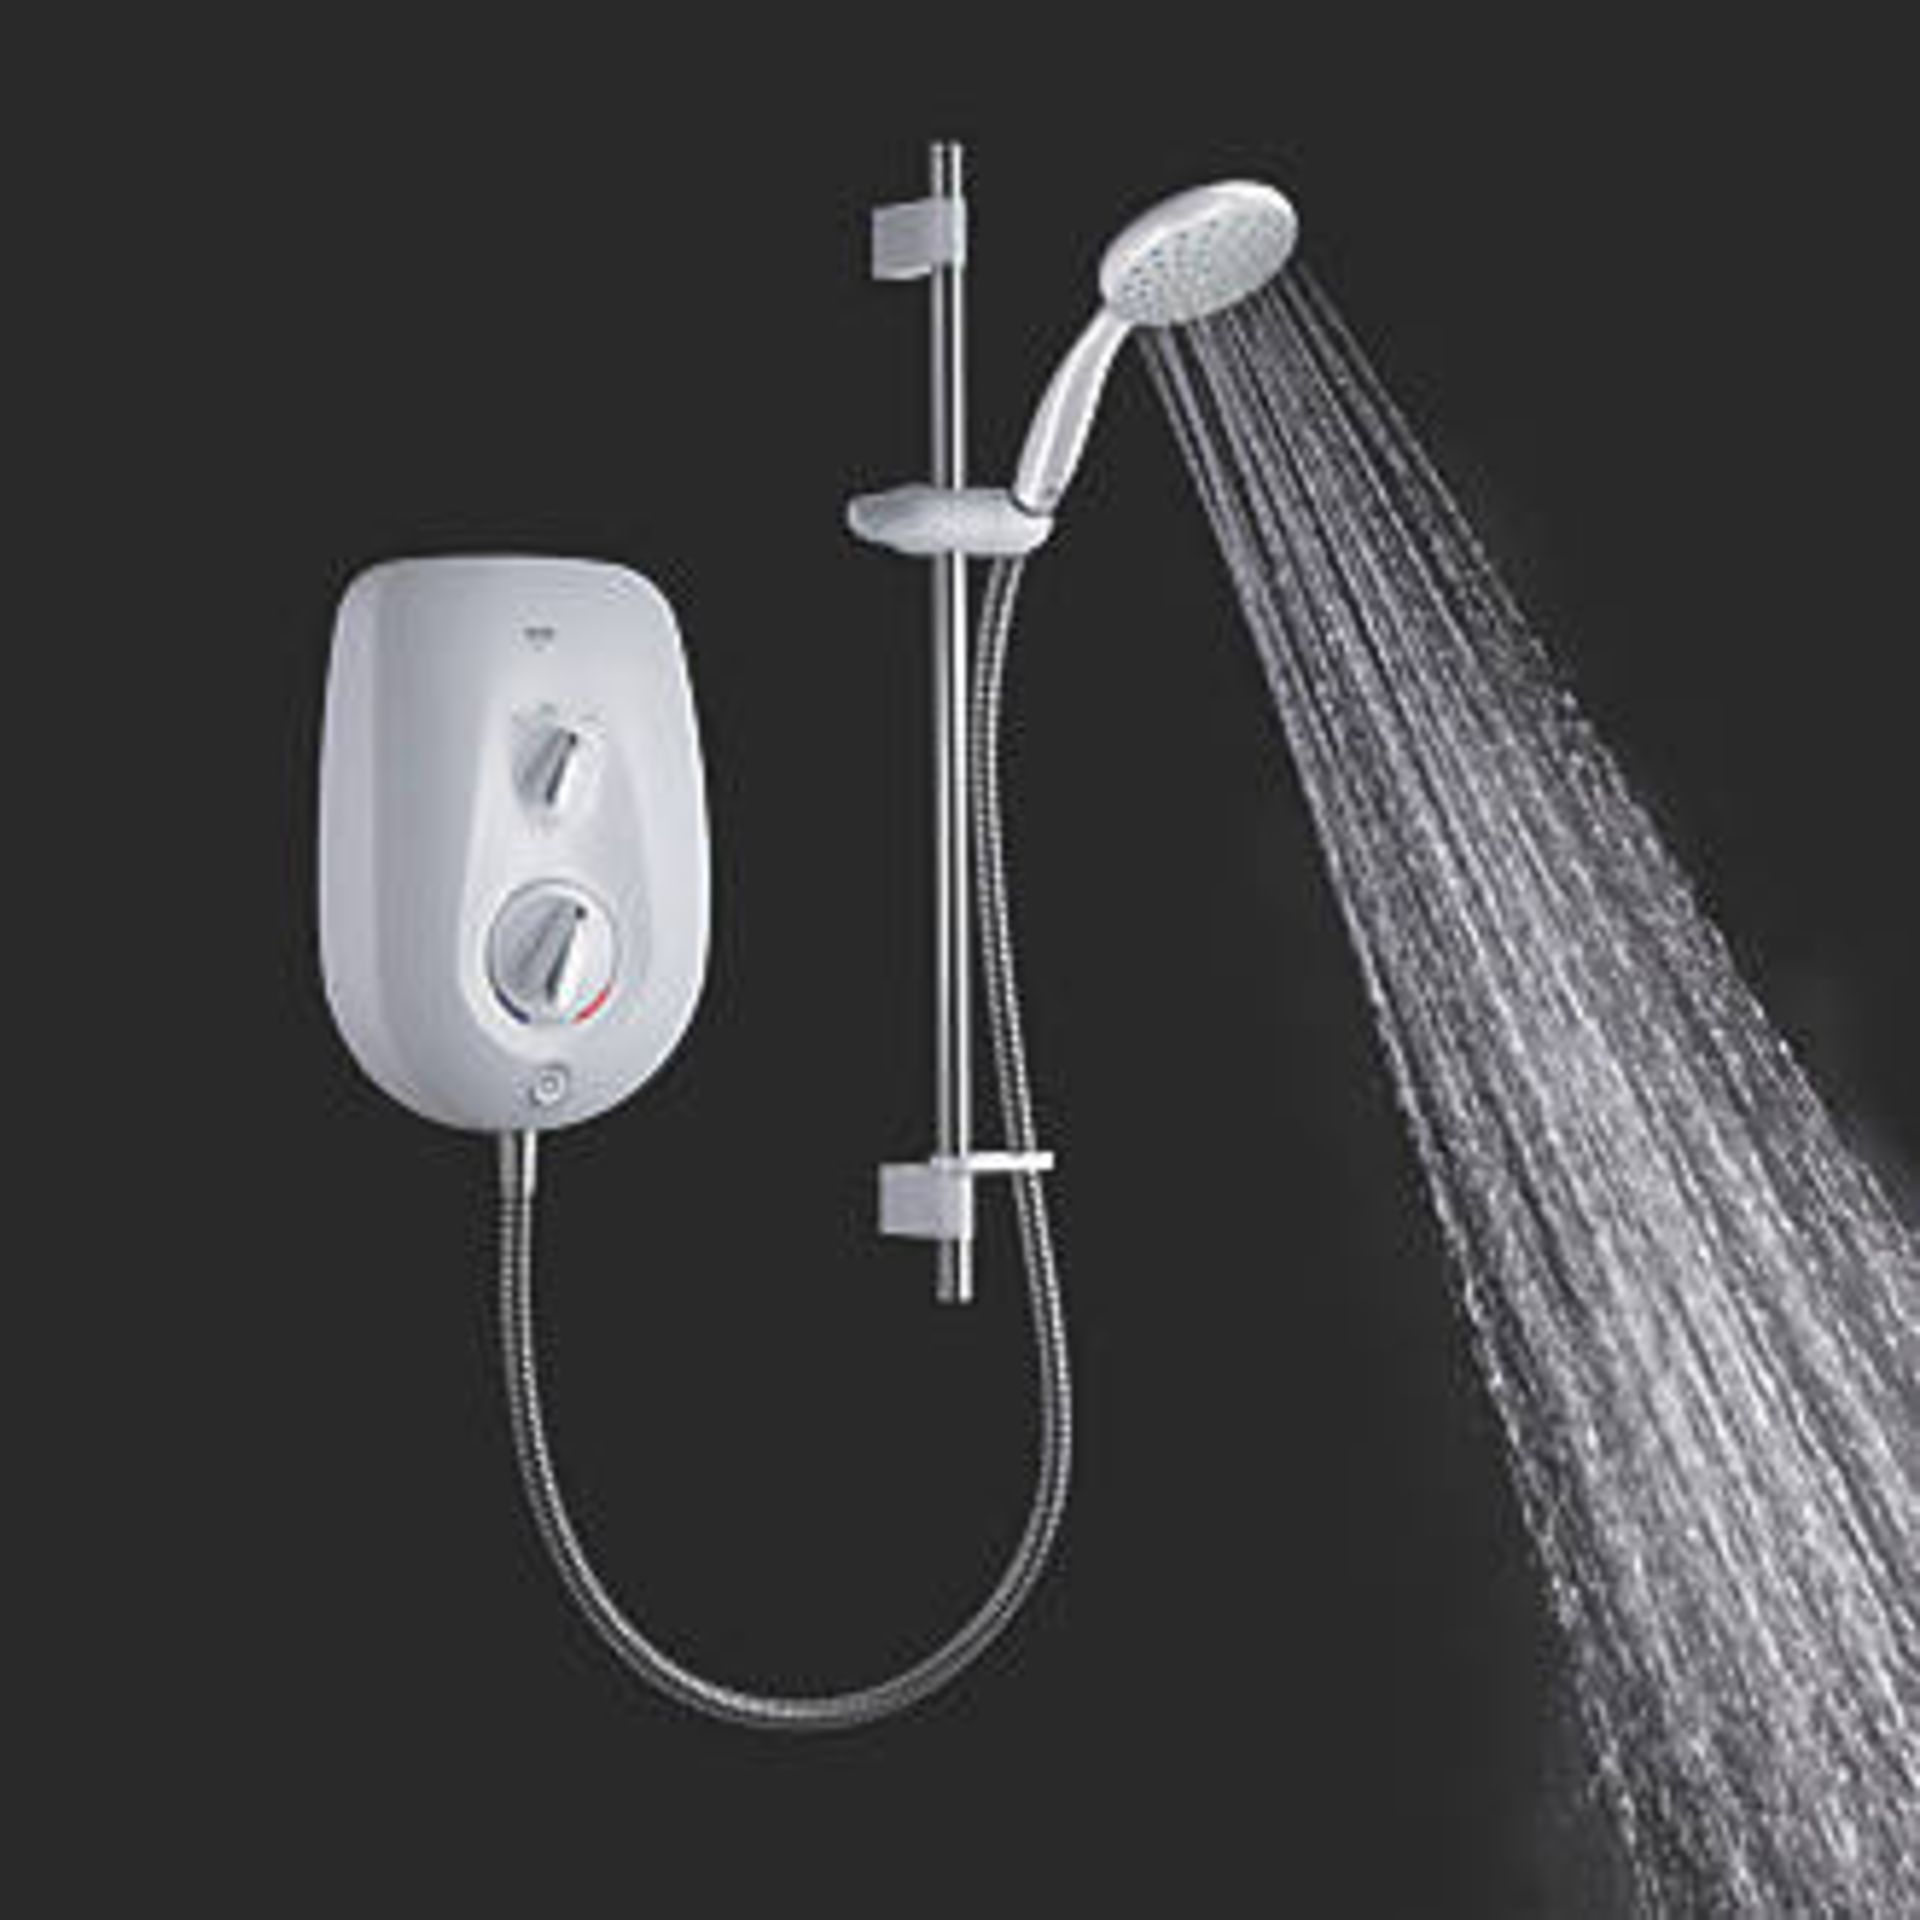 (XL67) Mira Go White 10.8kW Electric Shower. RRP £324.99. Contemporary electric shower with pr...